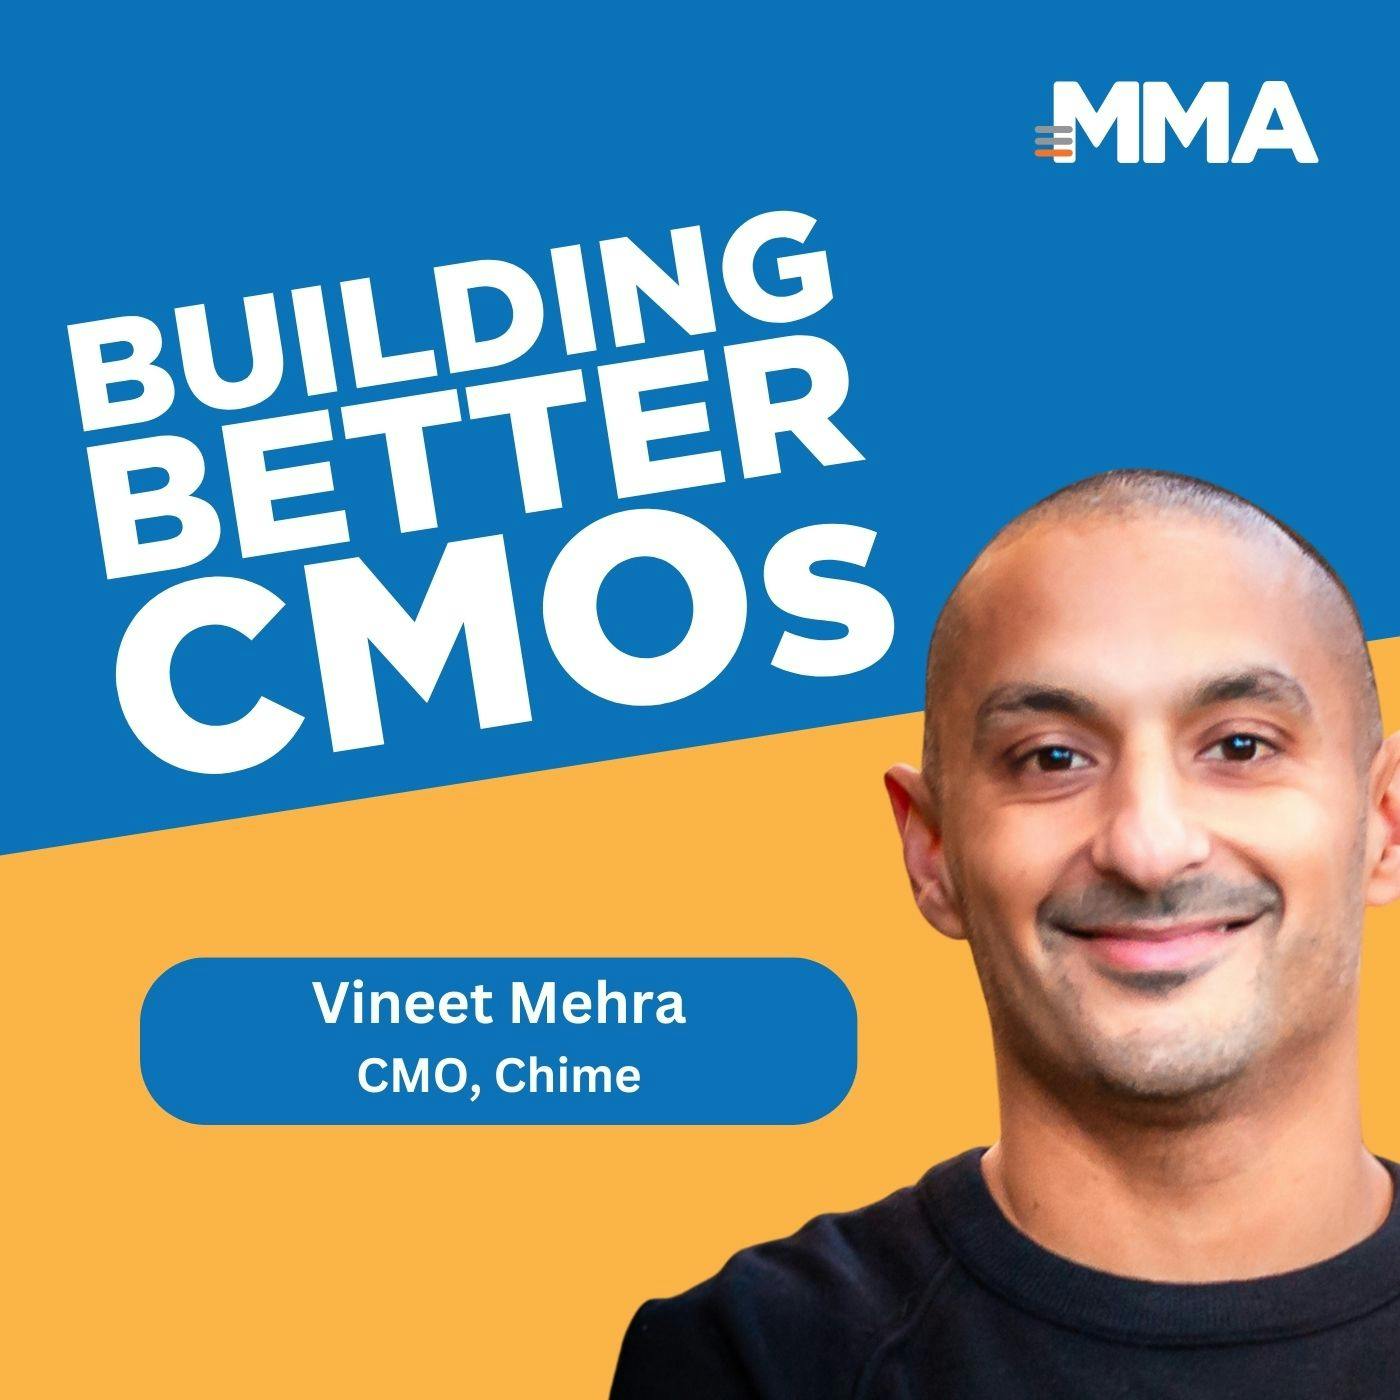 Vineet Mehra, CMO of Chime: "Performance Storytelling" is Brand AND Performance